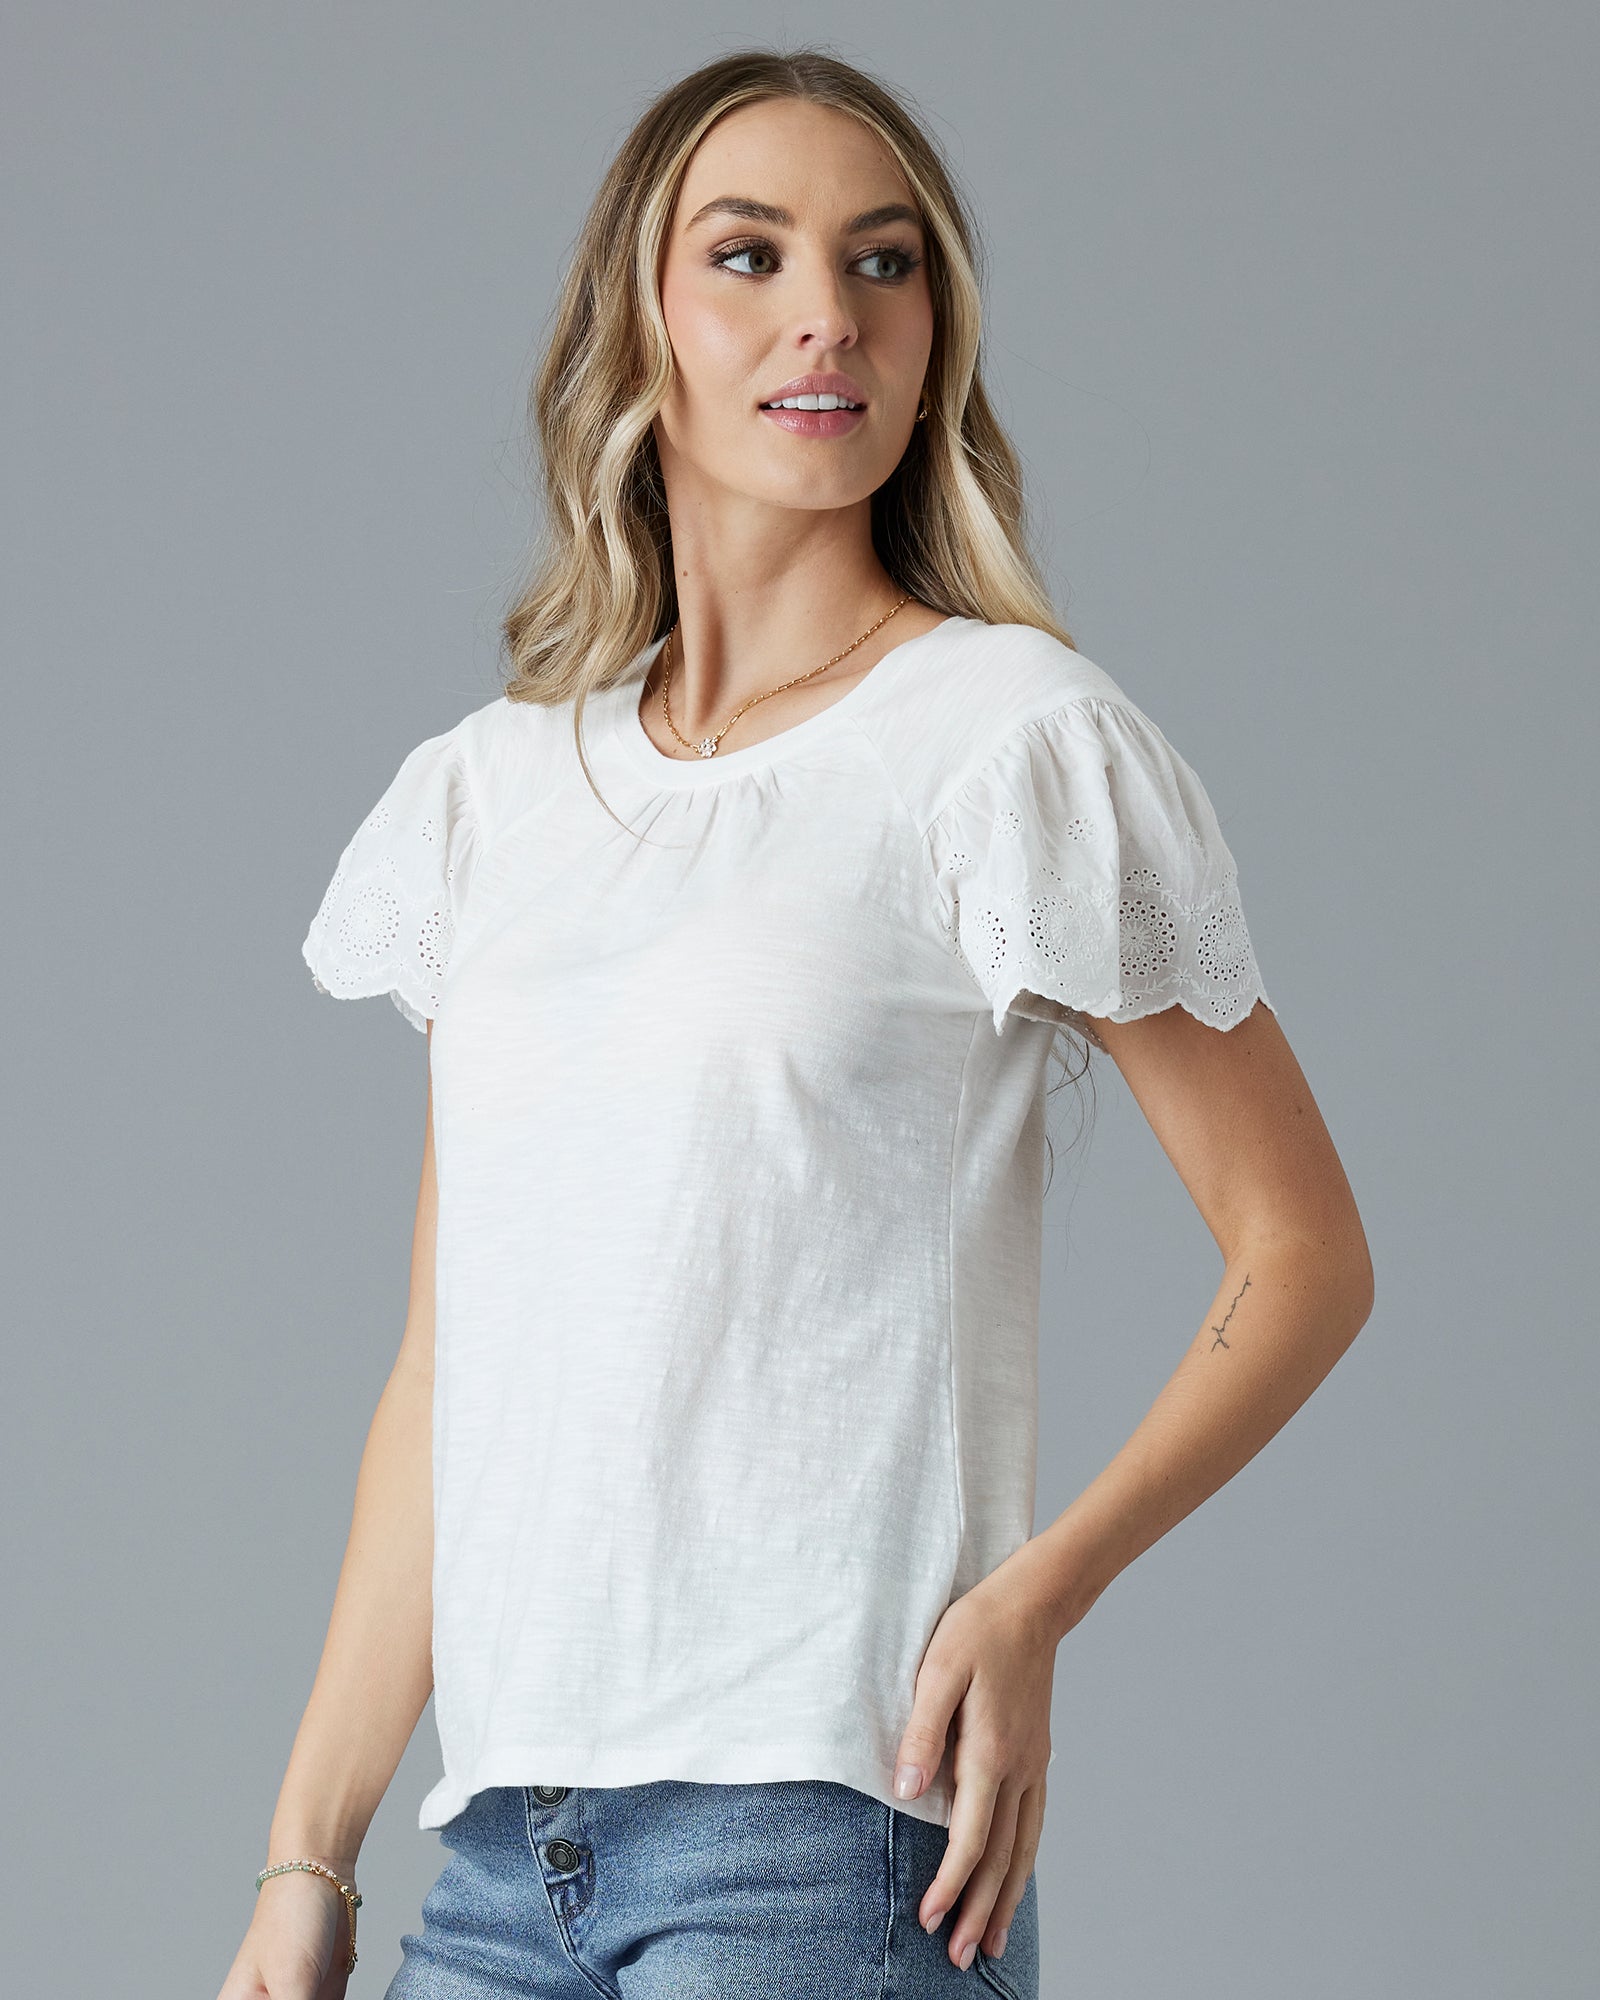 Woman in a white, short sleeved t-shirt with eyelet detail on sleeves.